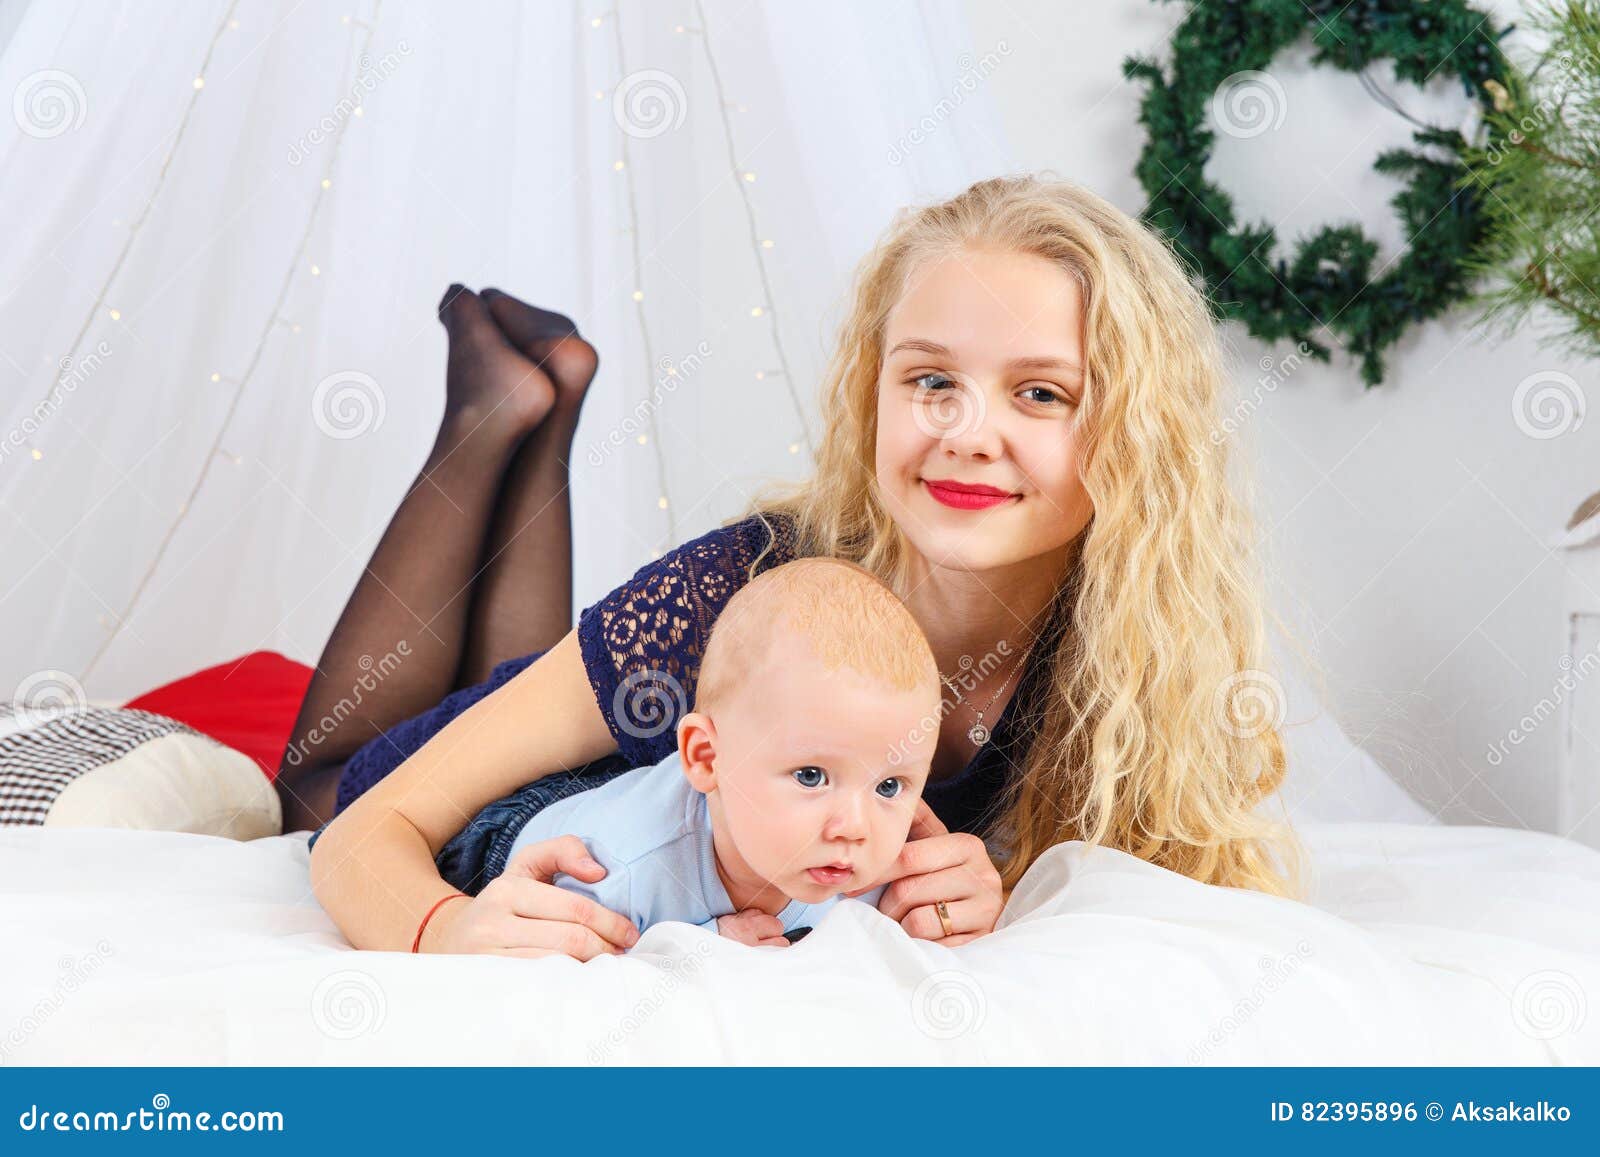 Very Young Teen Girl On The Bed